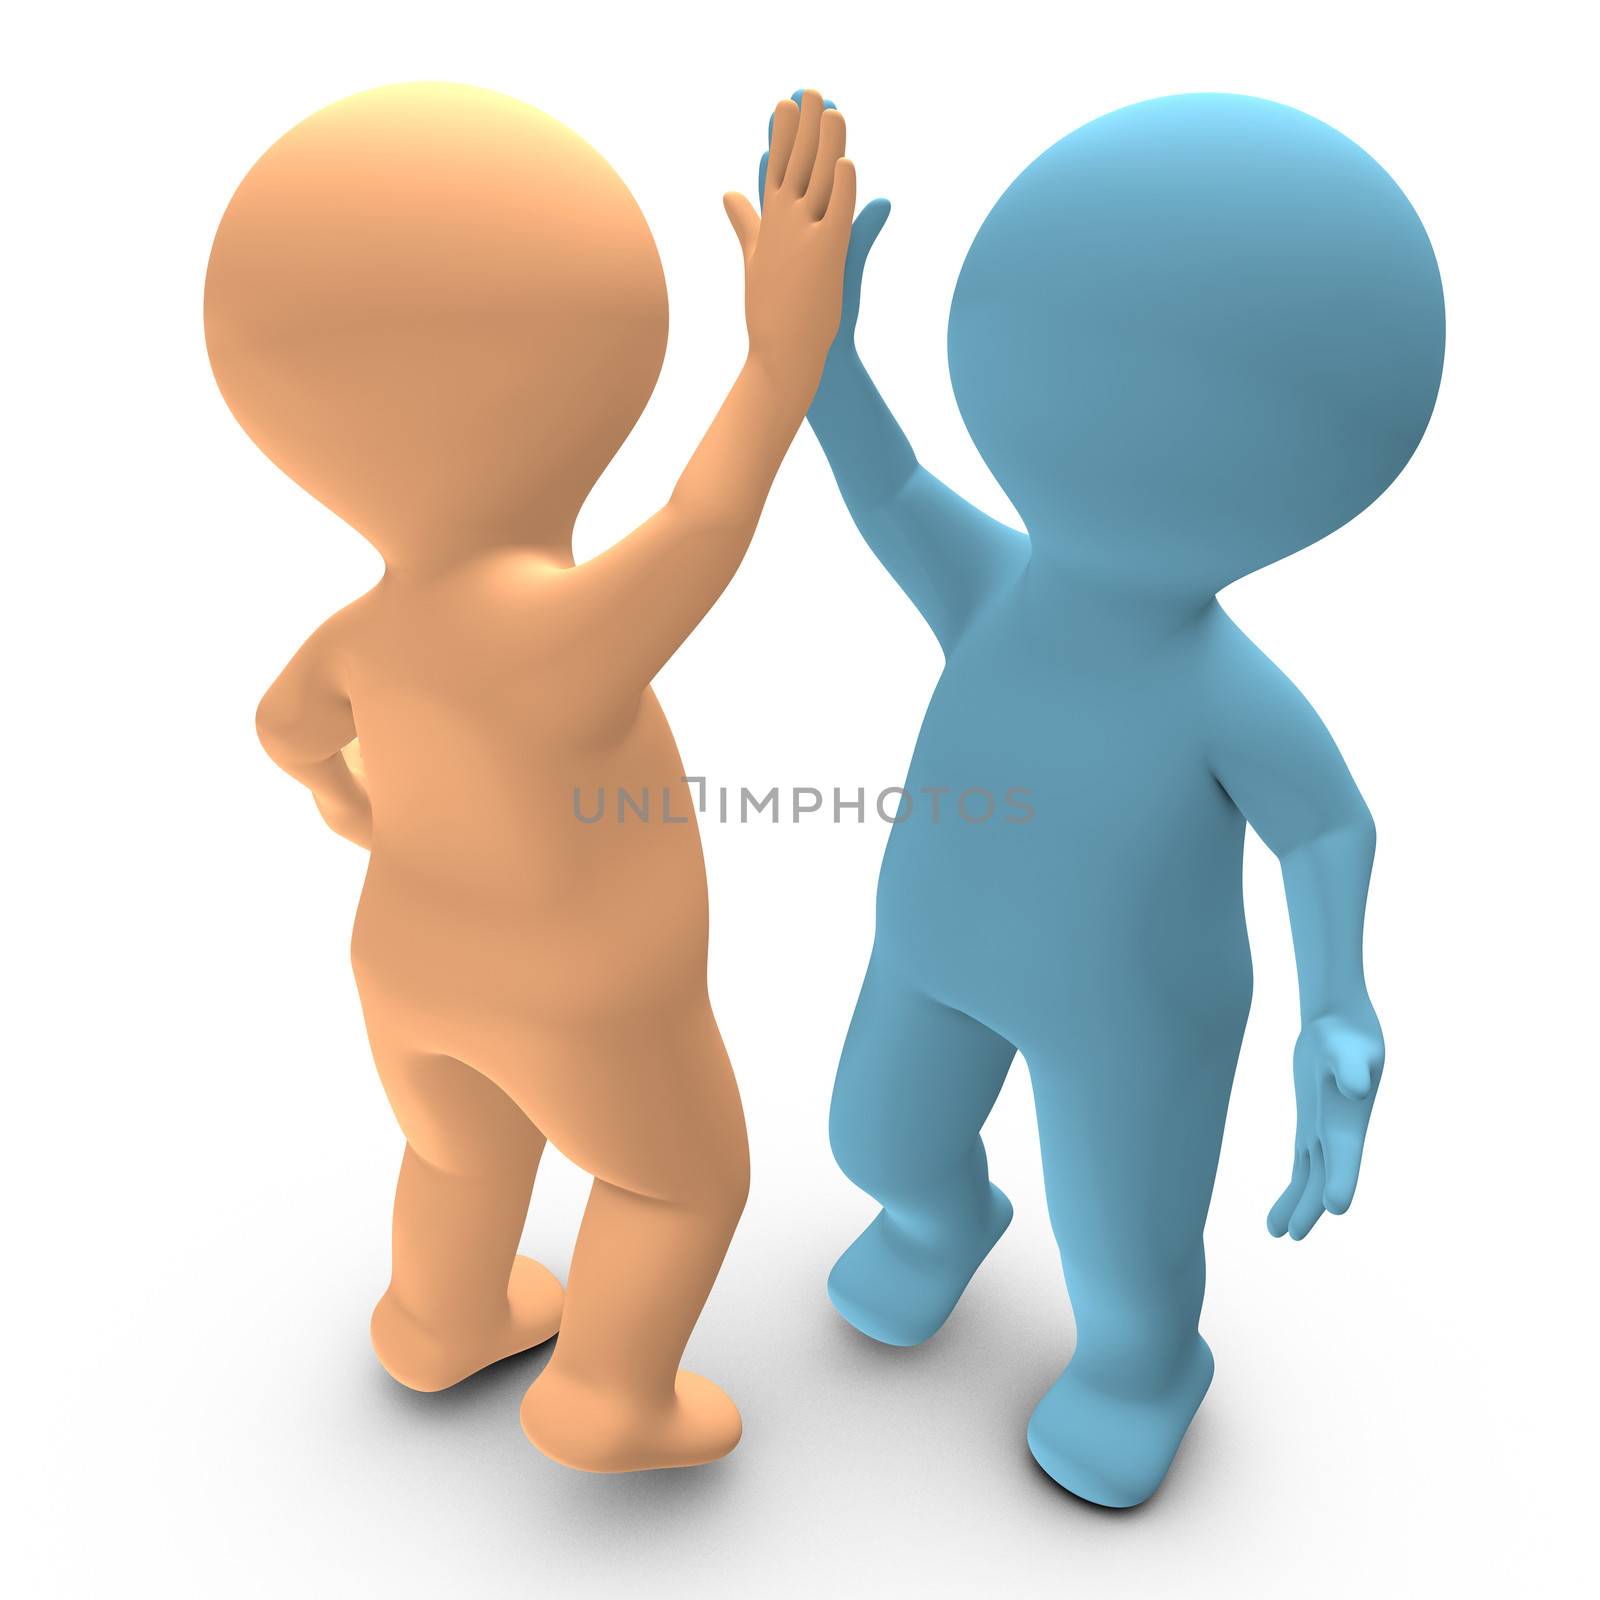 This 3D picture illustrates a high five between two persons that celebrate a success